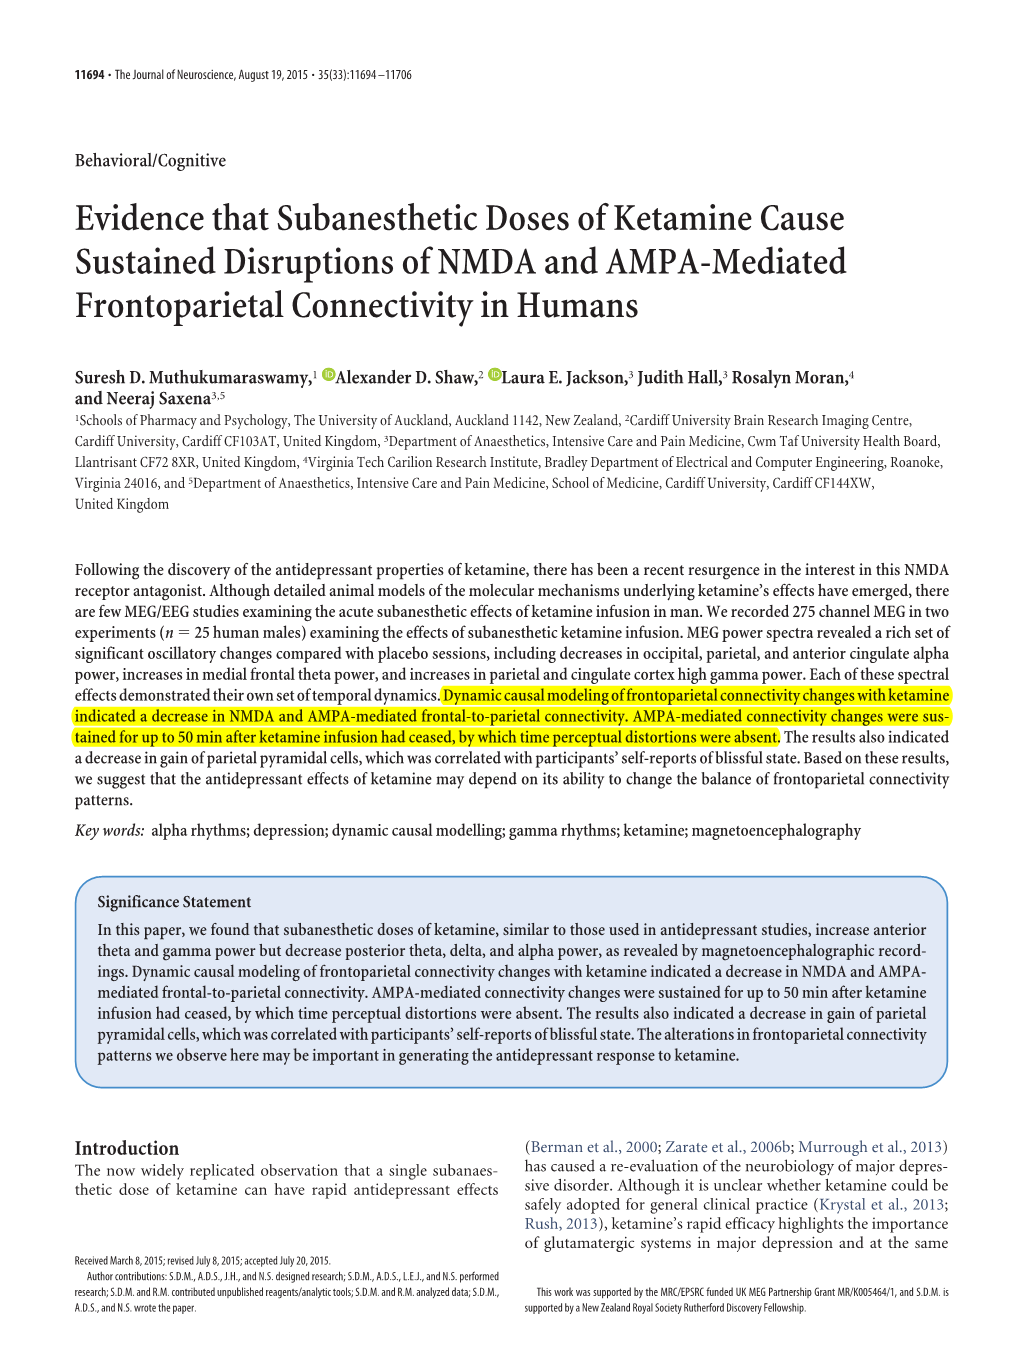 Evidence That Subanesthetic Doses of Ketamine Cause Sustained Disruptions of NMDA and AMPA-Mediated Frontoparietal Connectivity in Humans